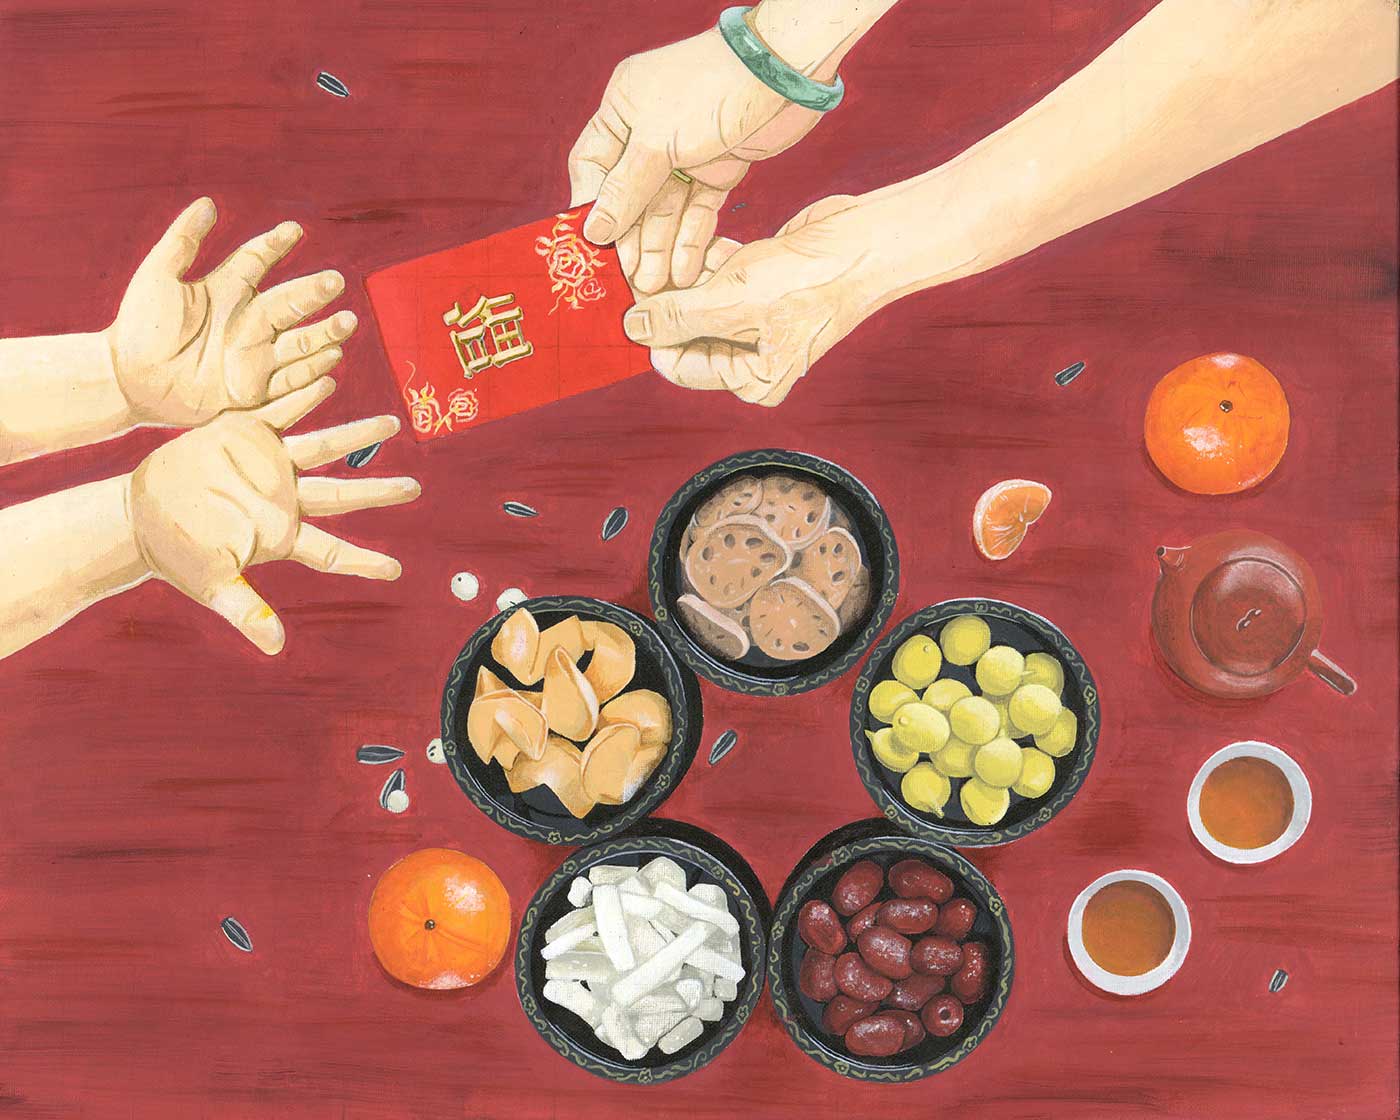 A pair of hands holds a red card with golden mandarin chinese characters, a pair of smaller hands reaches out for the card. The hands are set on top of a red tablecloth and are next to a tea pot and an assortment of small plates with food.